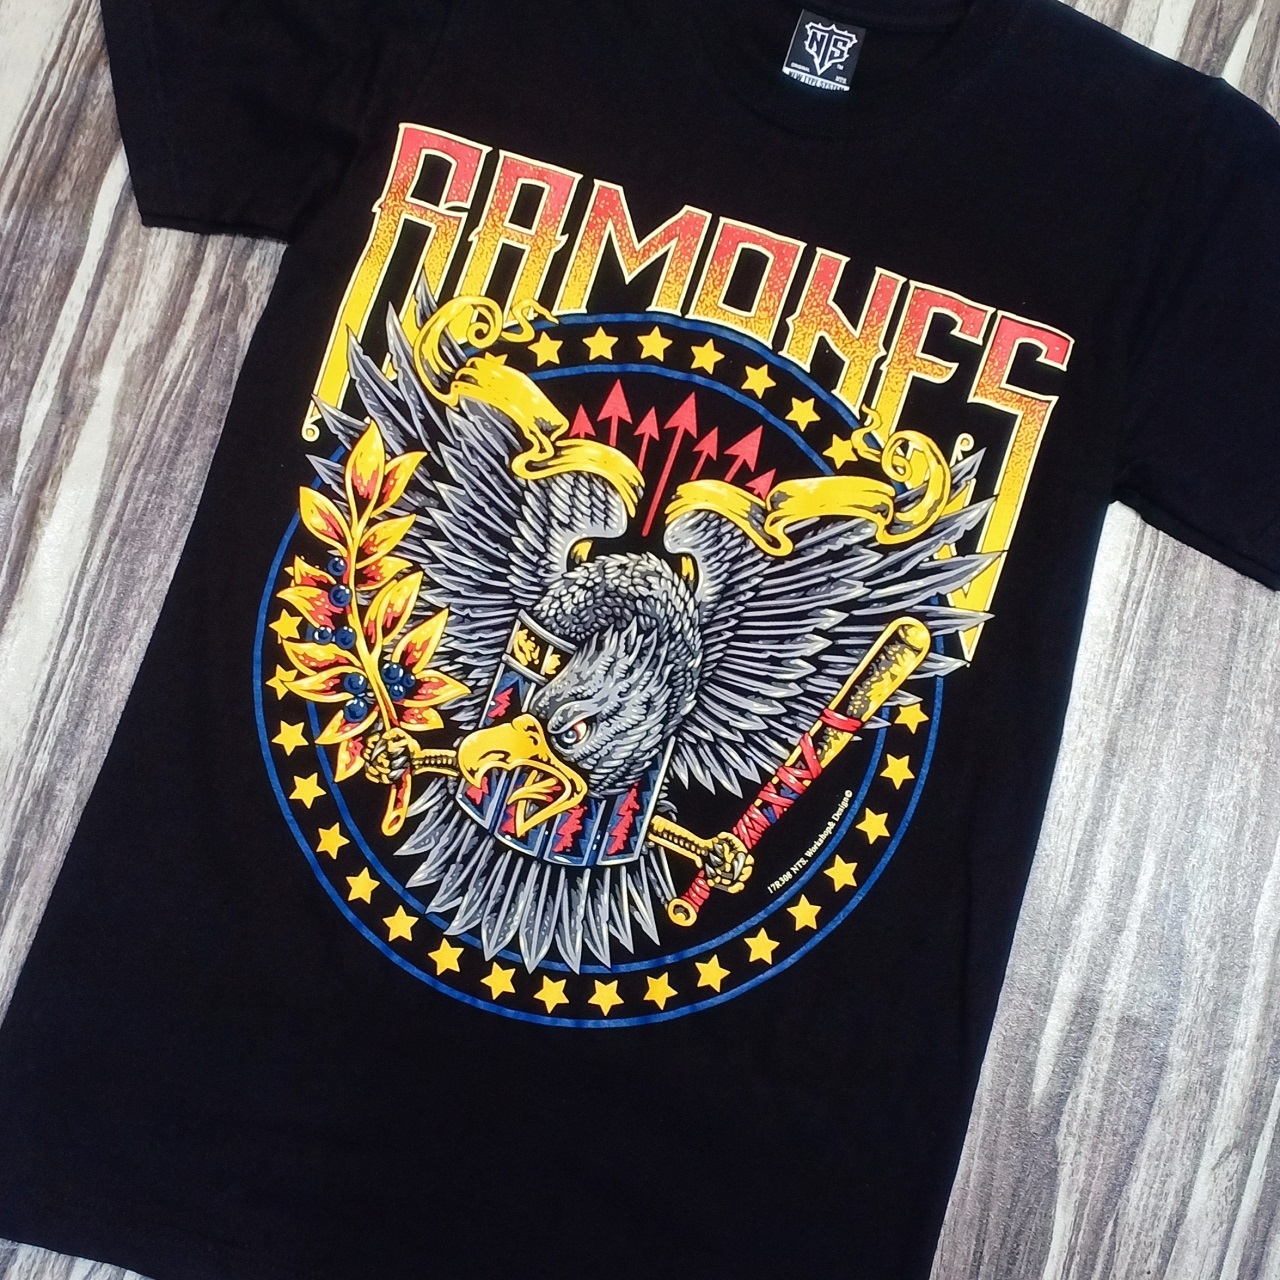 17R308 RAMONES AMERICAN PUNK COTTON QUALITY LIMITED NEW BLACK GRADE EDITION SPEED ORIGINAL SILK T-SHIRT – EAGLE TIMBER NTS COLOR SYSTEM HIGH SYSTEM TYPE TYPE MOAI NEW SCREEN PREMIUM BAND LOGO ROCK